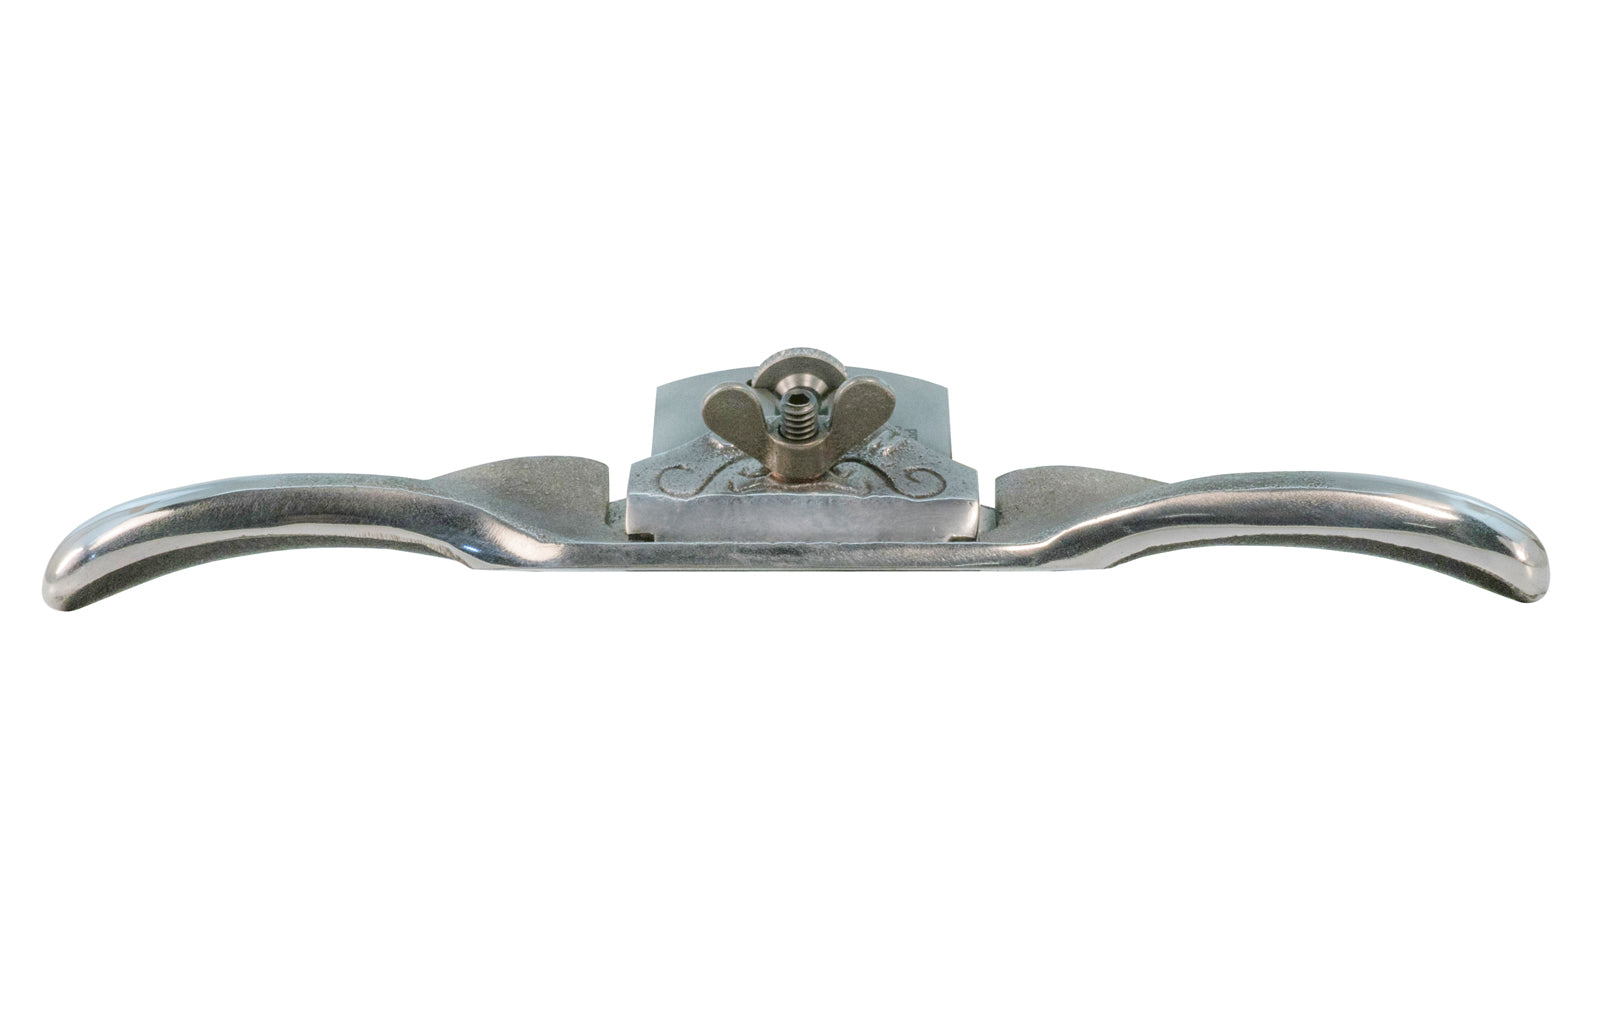 Clifton 650 Curved Sole Spokeshave is made from very tough spheridal graphite/malleable iron. Cryogenically treated .01 tool steel HRC 59-61. Fully adjustable blade for depth of cut, resting at 25° angle. 2-1/8